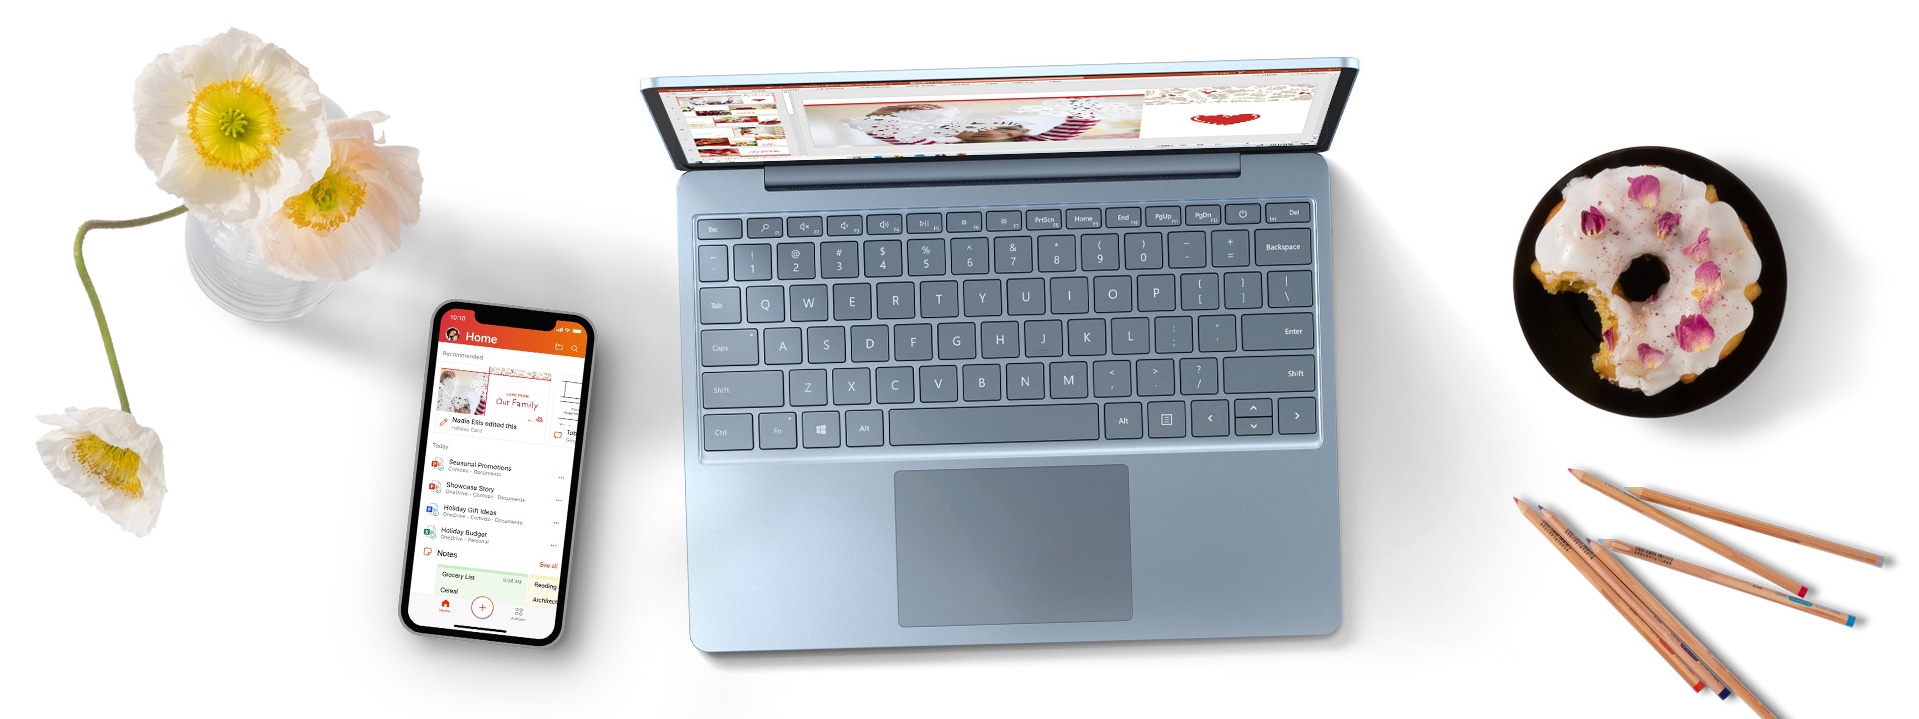 Surface Laptop Go on a desk with a cell phone, flowers and a donut on a plate